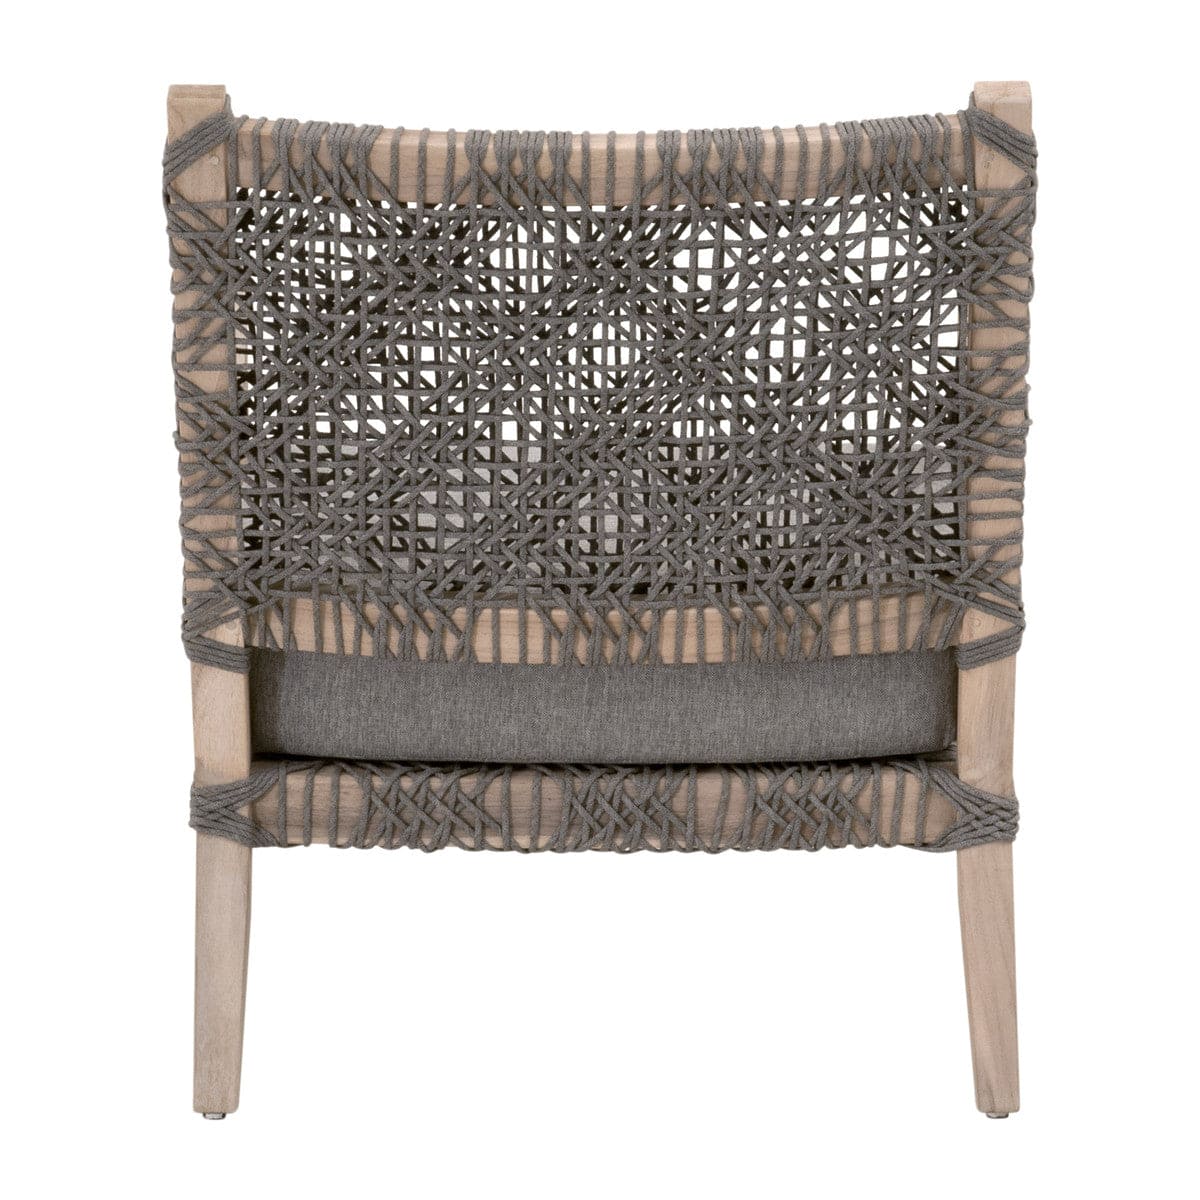 Woven Costa Outdoor Club Chair Back